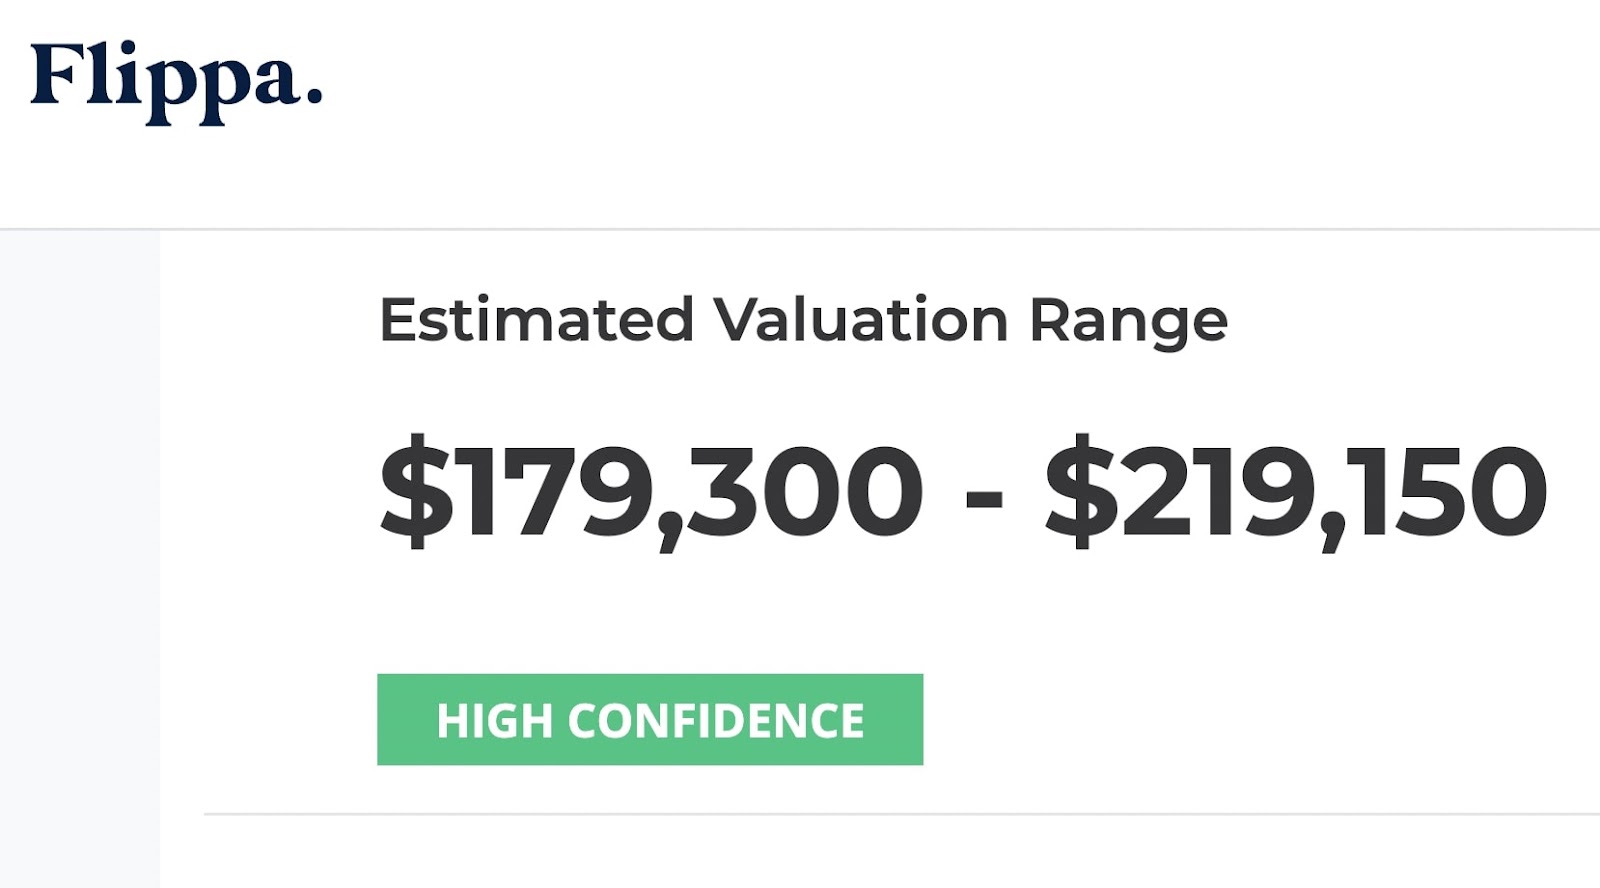 Estimated valuation scope  connected  Flippa's homepage